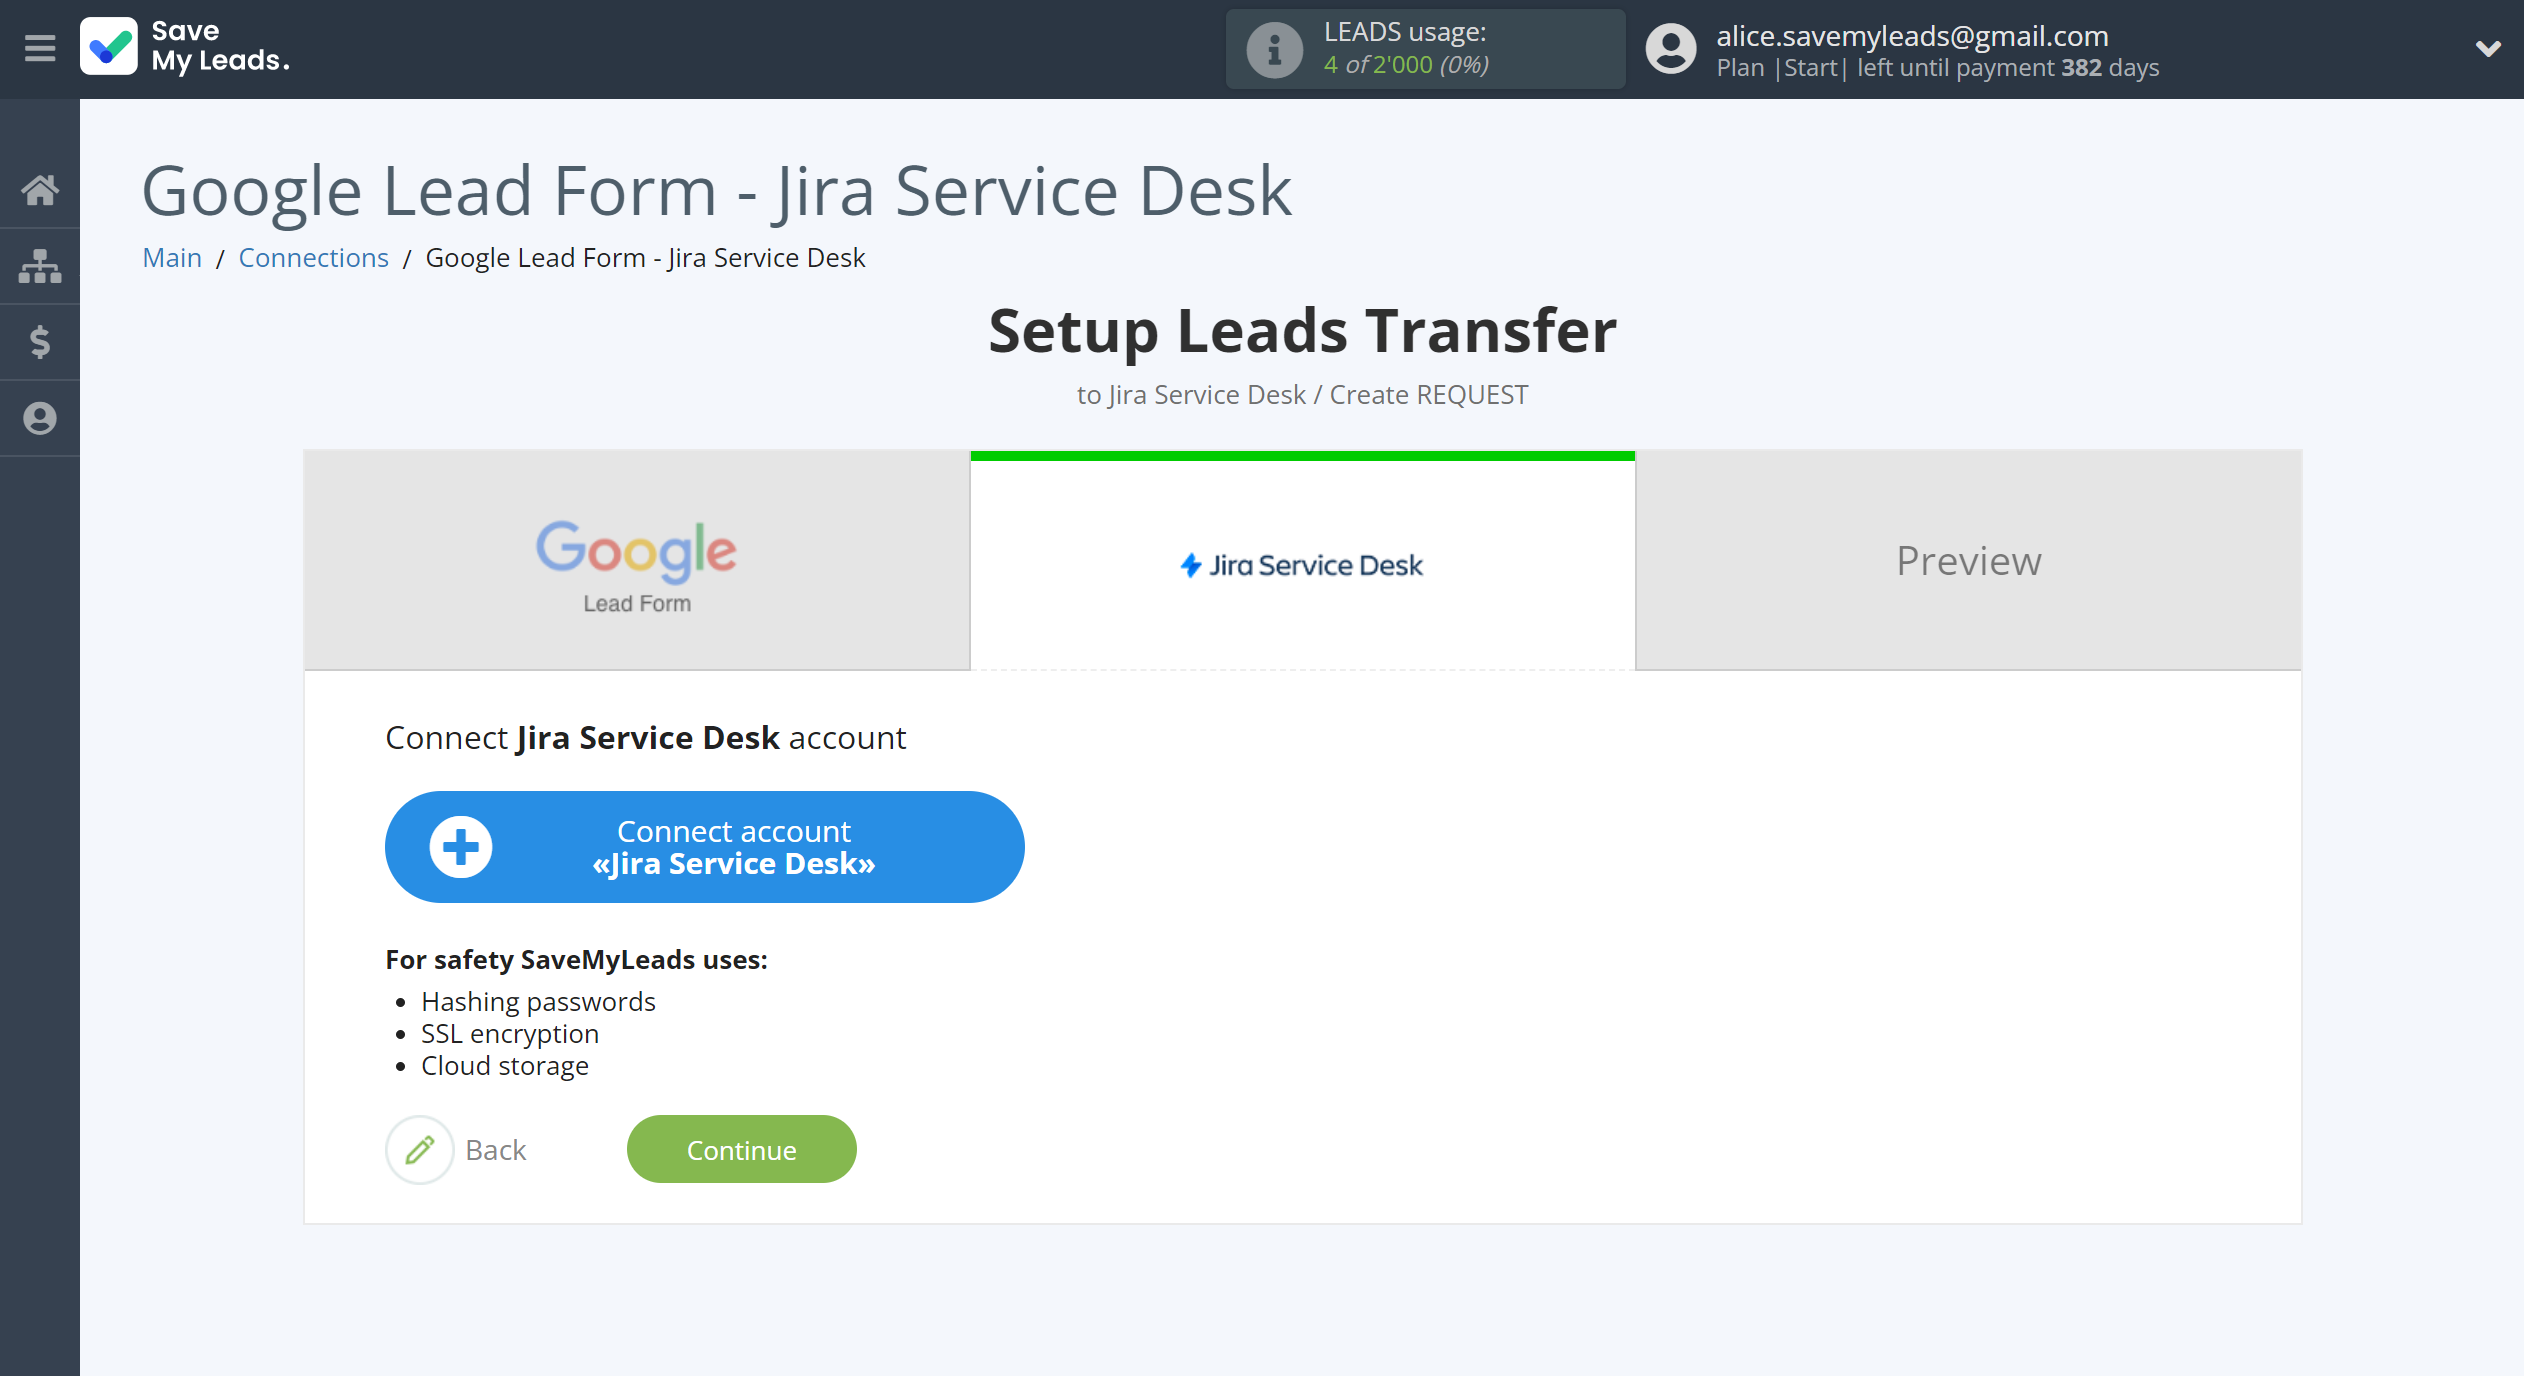 How to Connect Google Lead Form with Jira Service Desk | Data Destination account connection